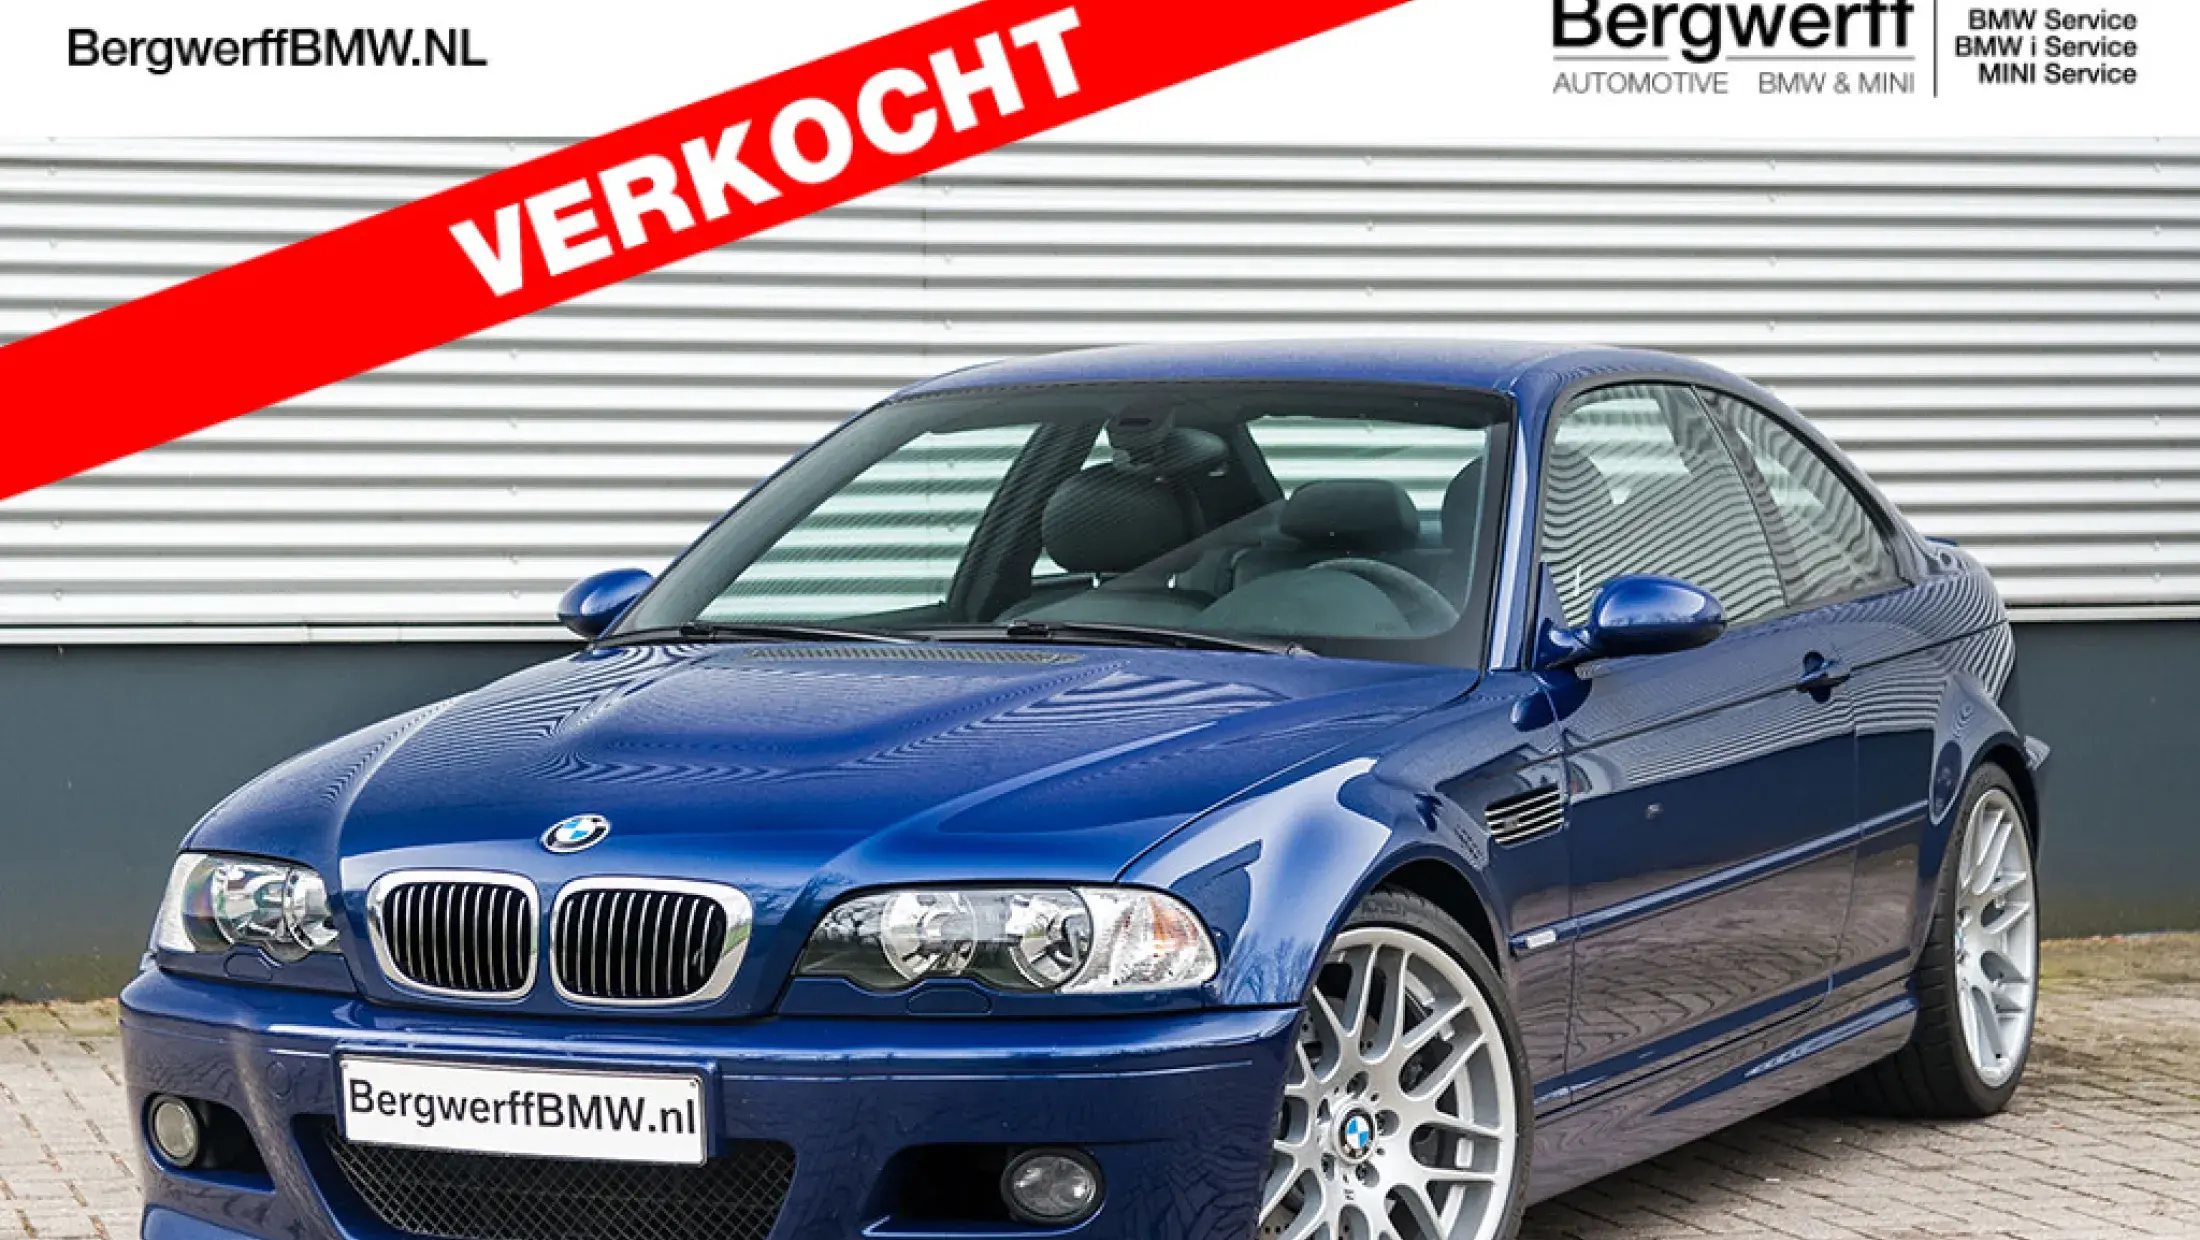 BMW M3 Competition Interlagos Blue pearl manual E46 M3 Coupe Bergwerff